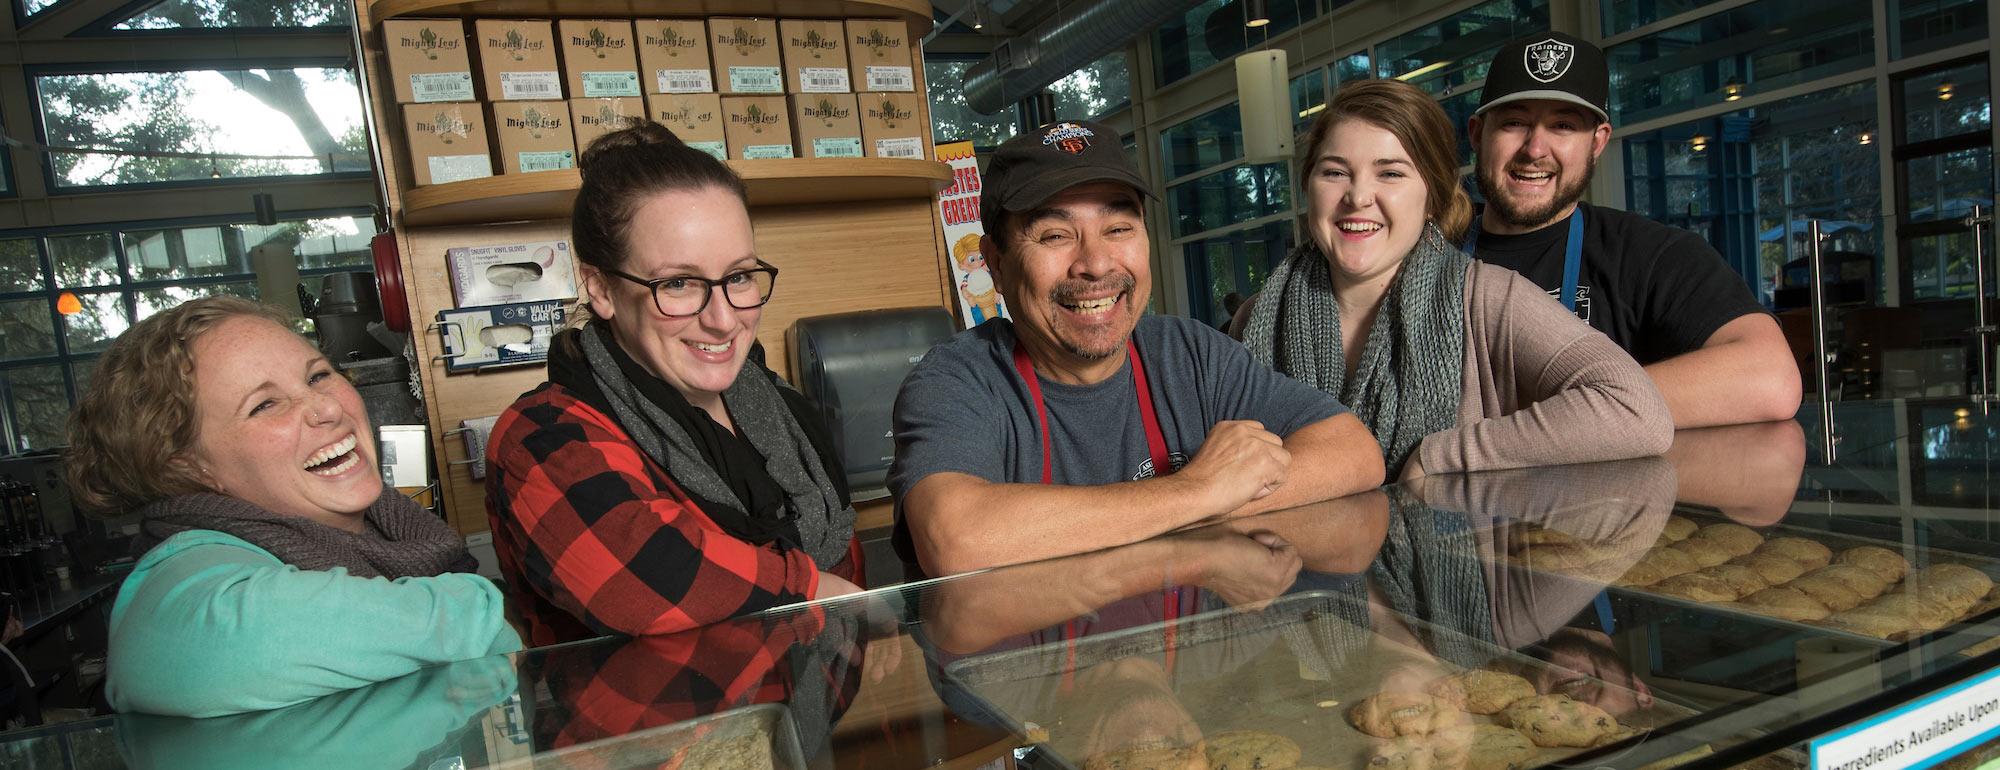 Student Coffee House workers smile with their manager over a counter filled with baked goods